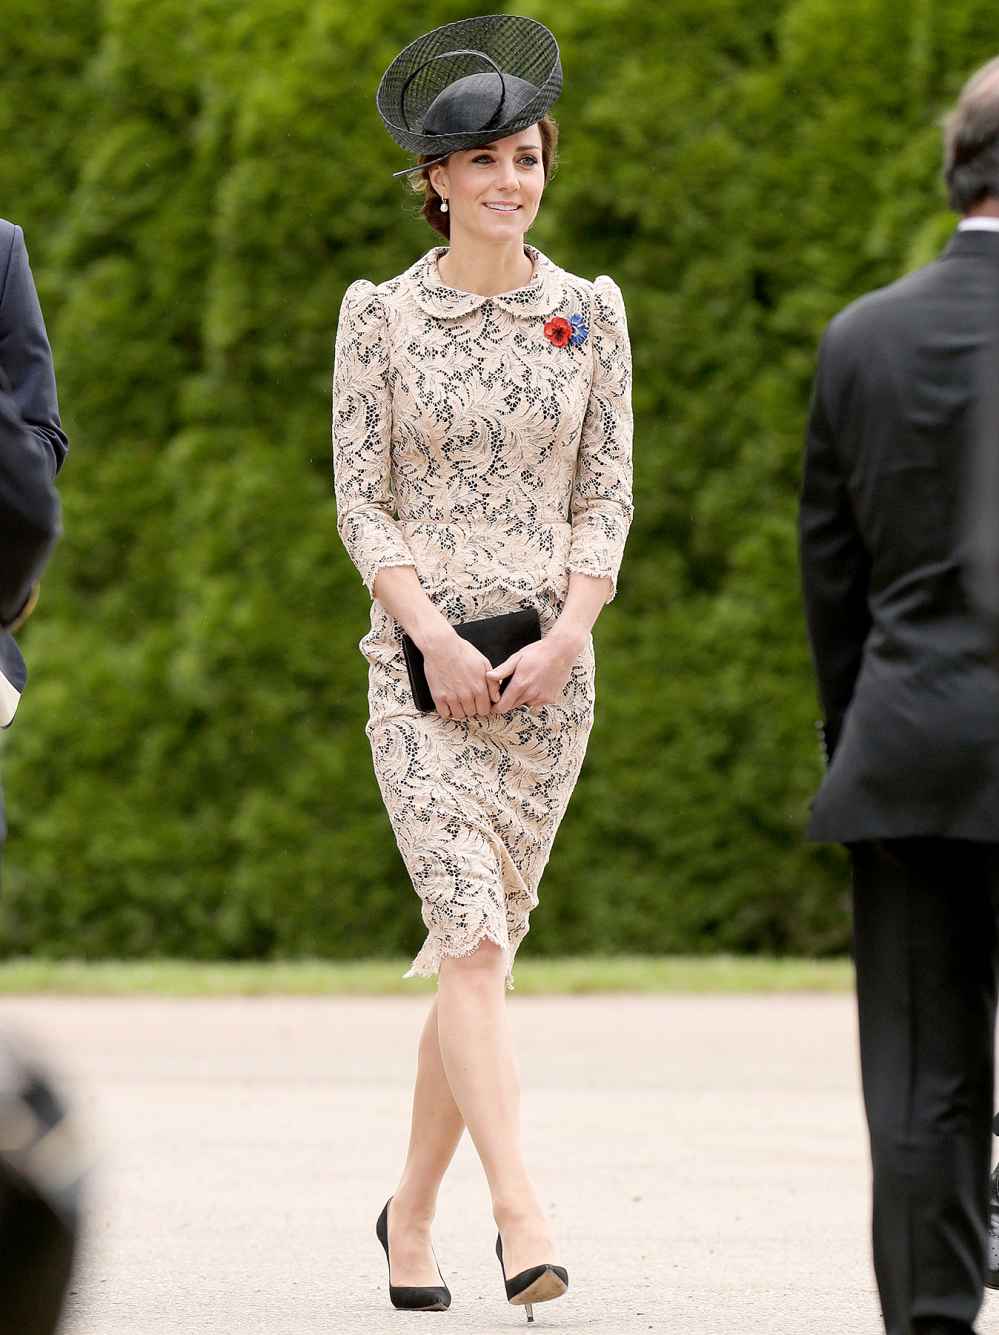 Kate Middleton Opts for Cream Lace Peplum Dress for Commemorative Service